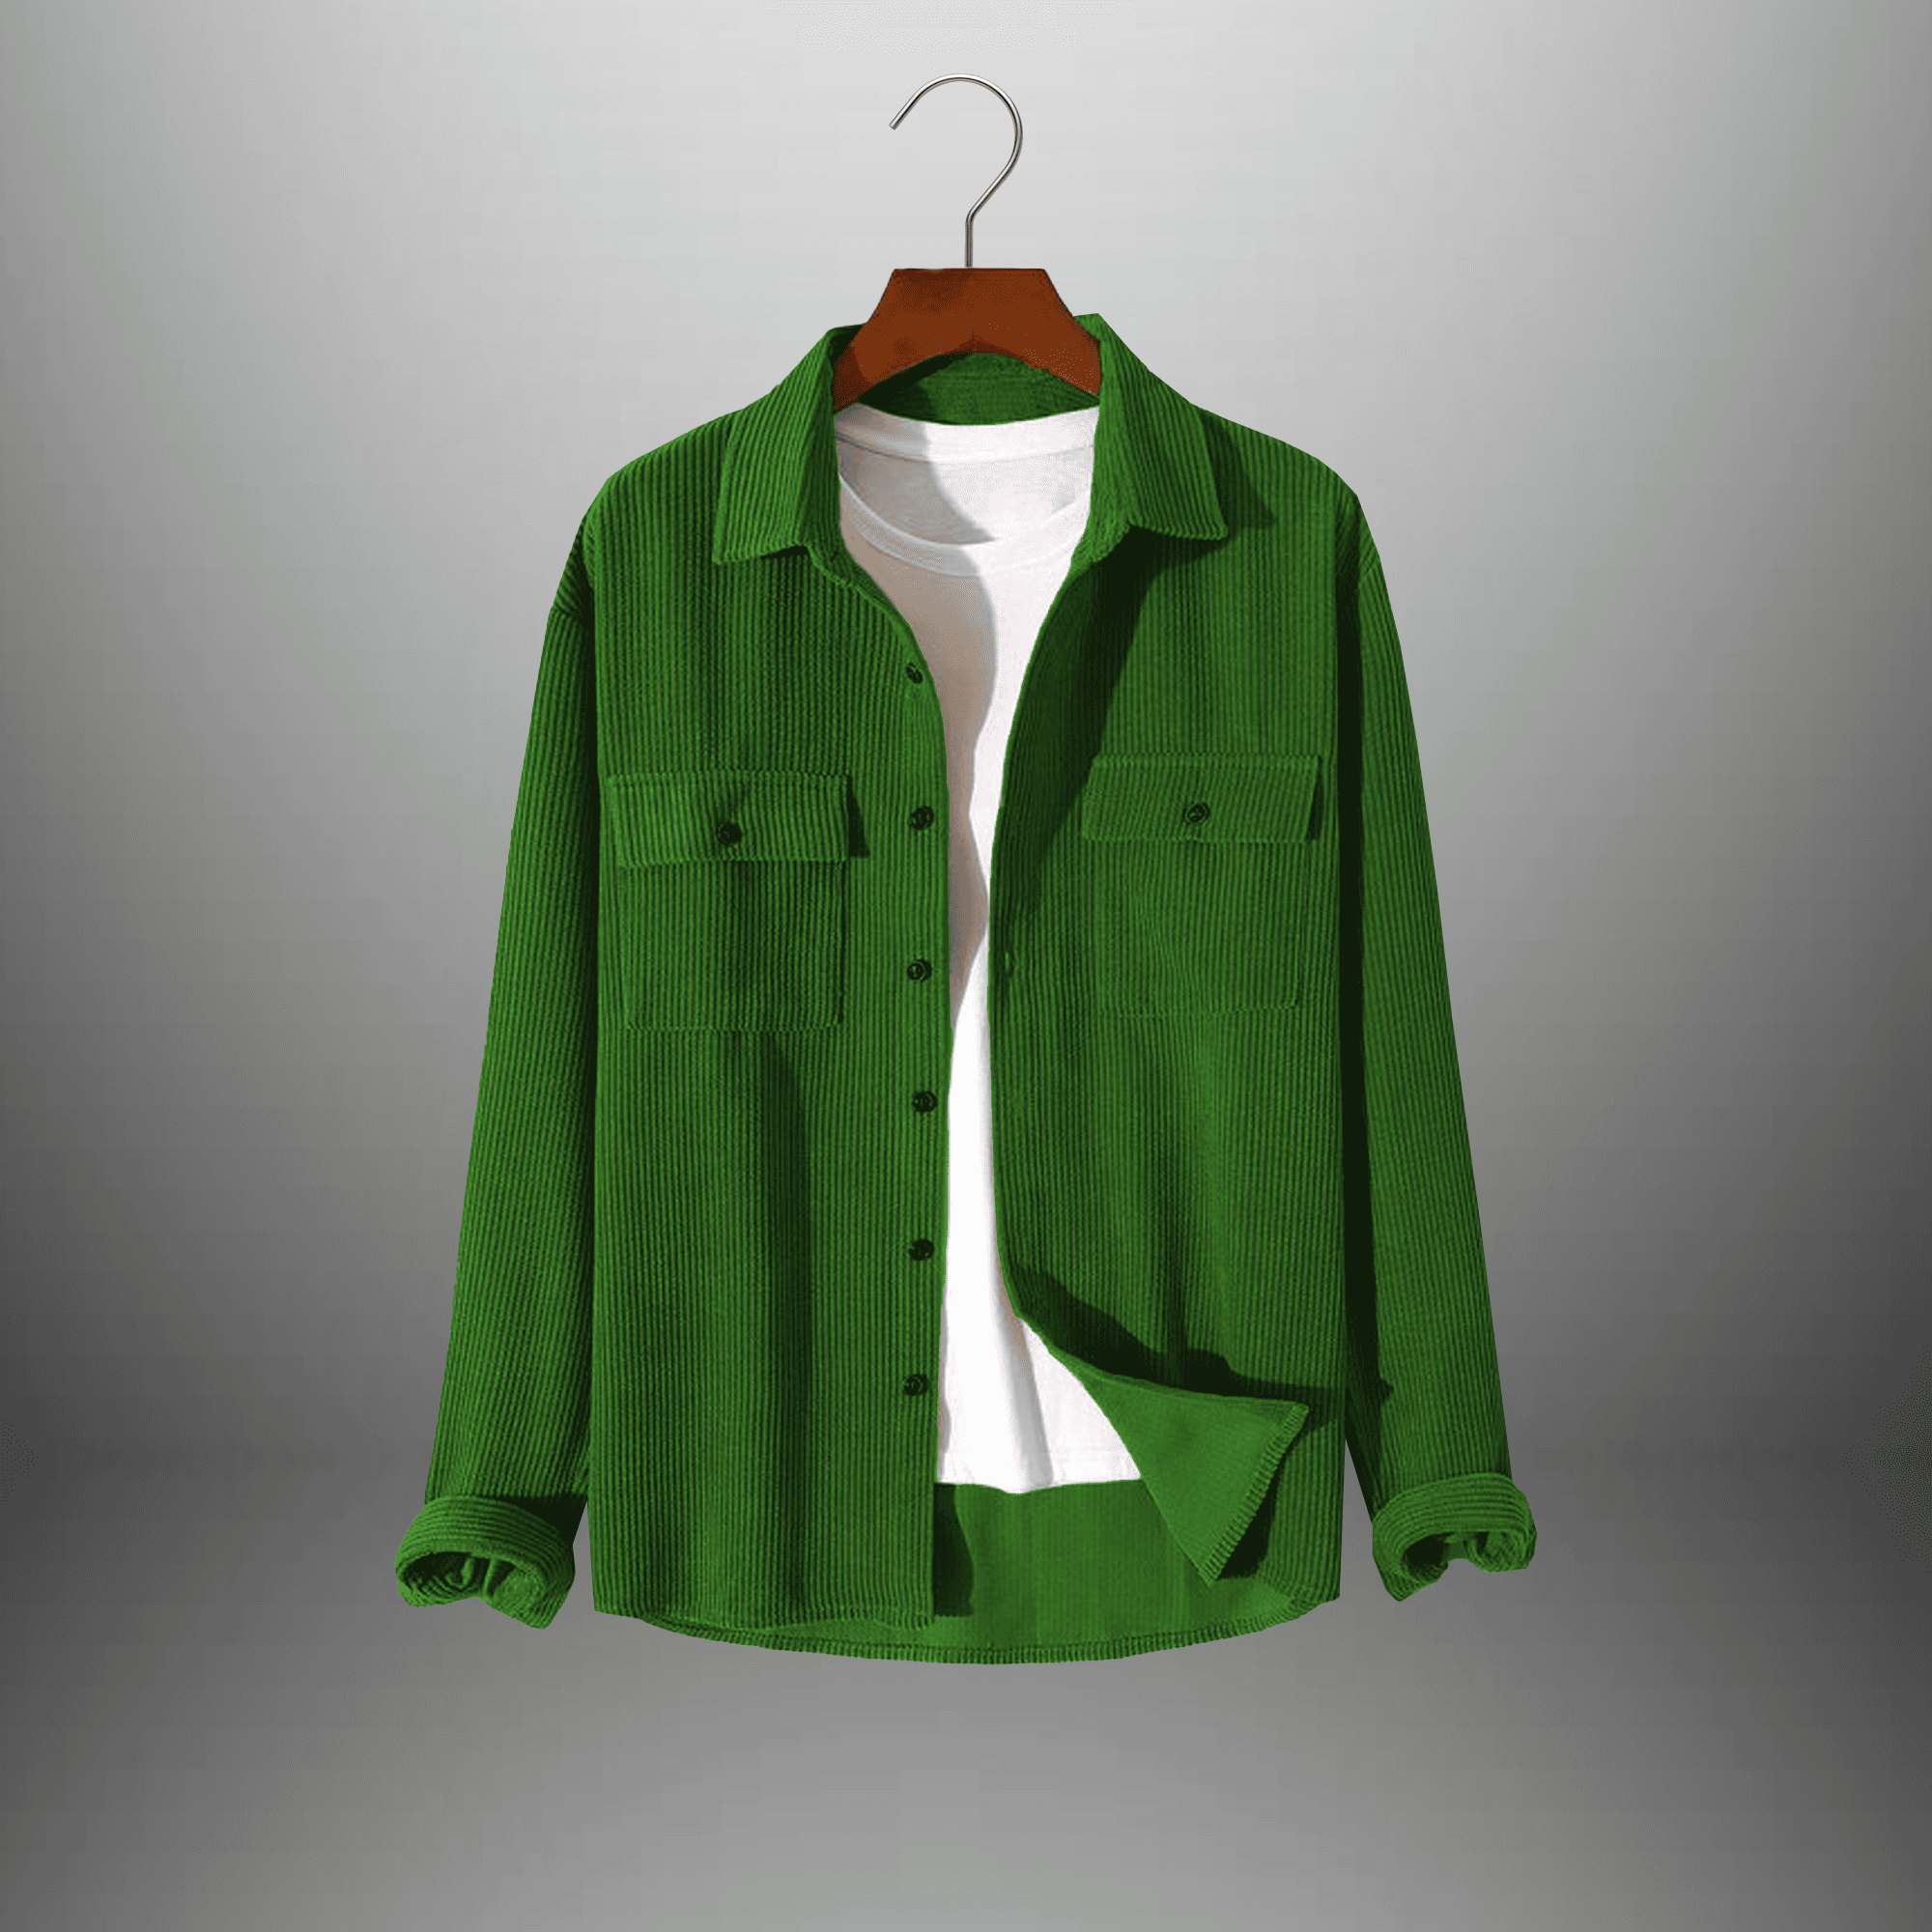 Men's Green Corduroy Shirt with Pocket and  A Plain white T-shirt-RMS032